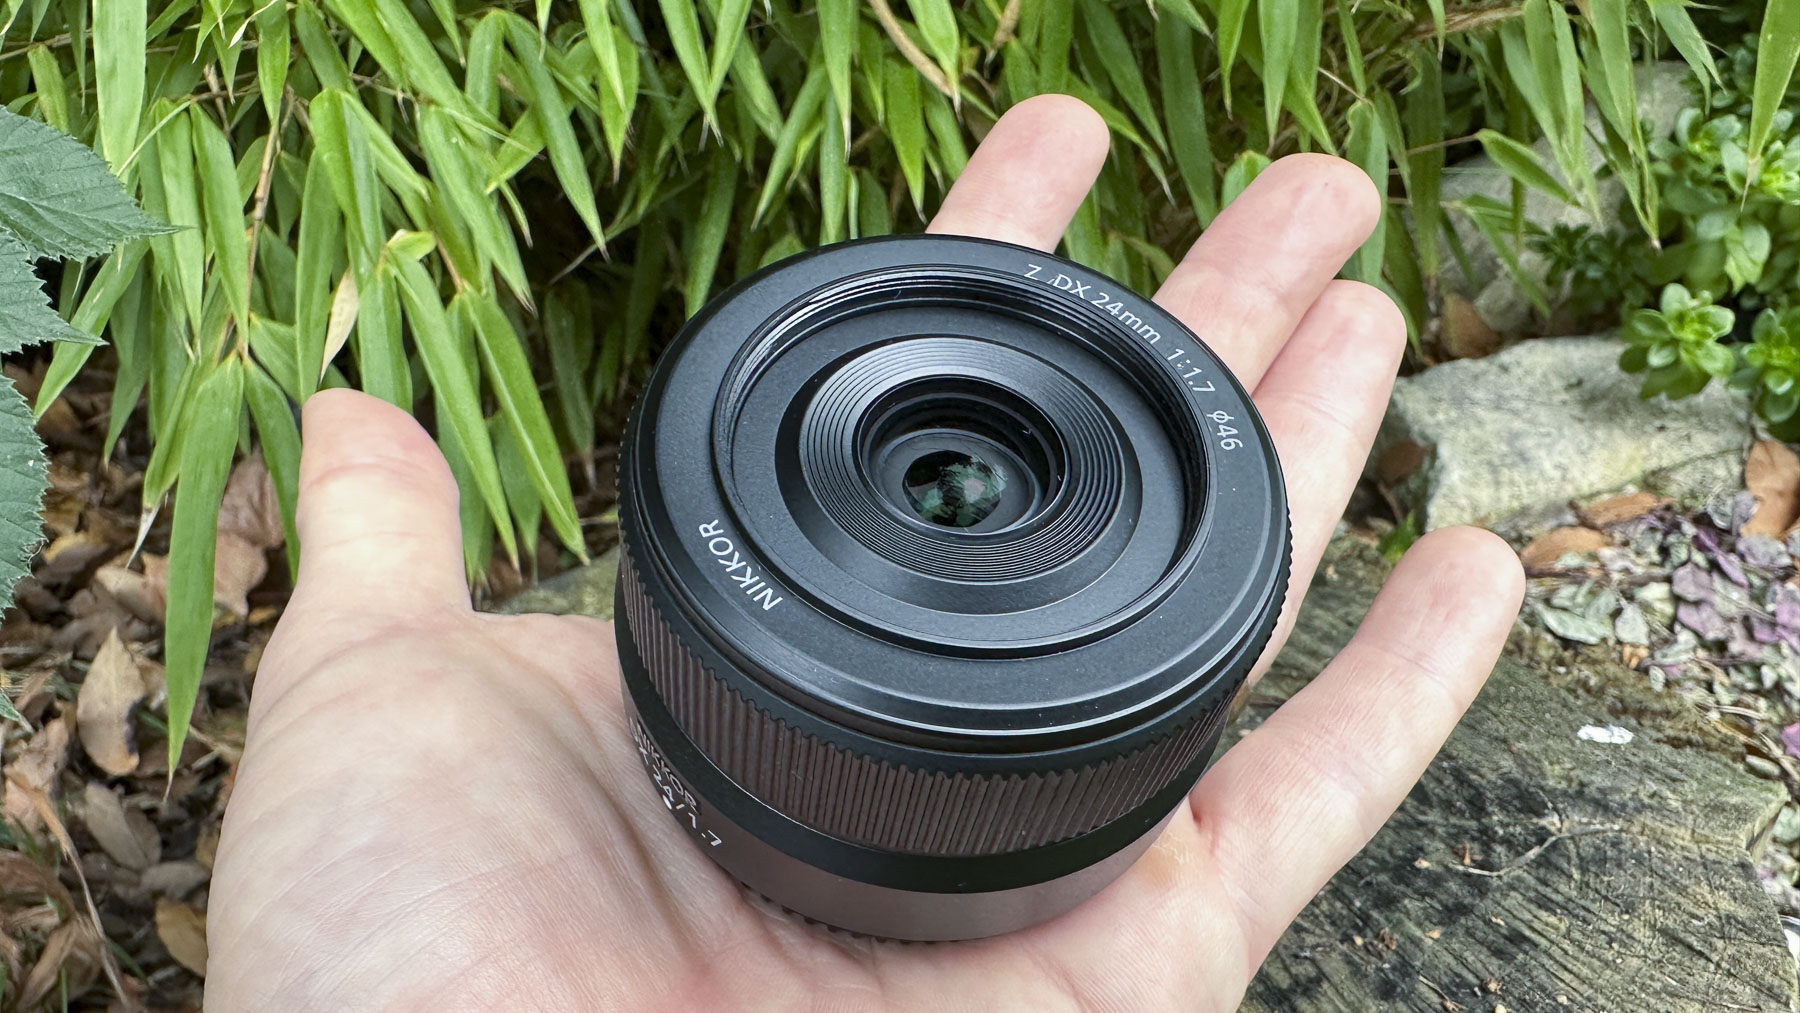 Nikkor Z DX 24mm f/1.7 lens pictured in hand showing how small and light the lens is